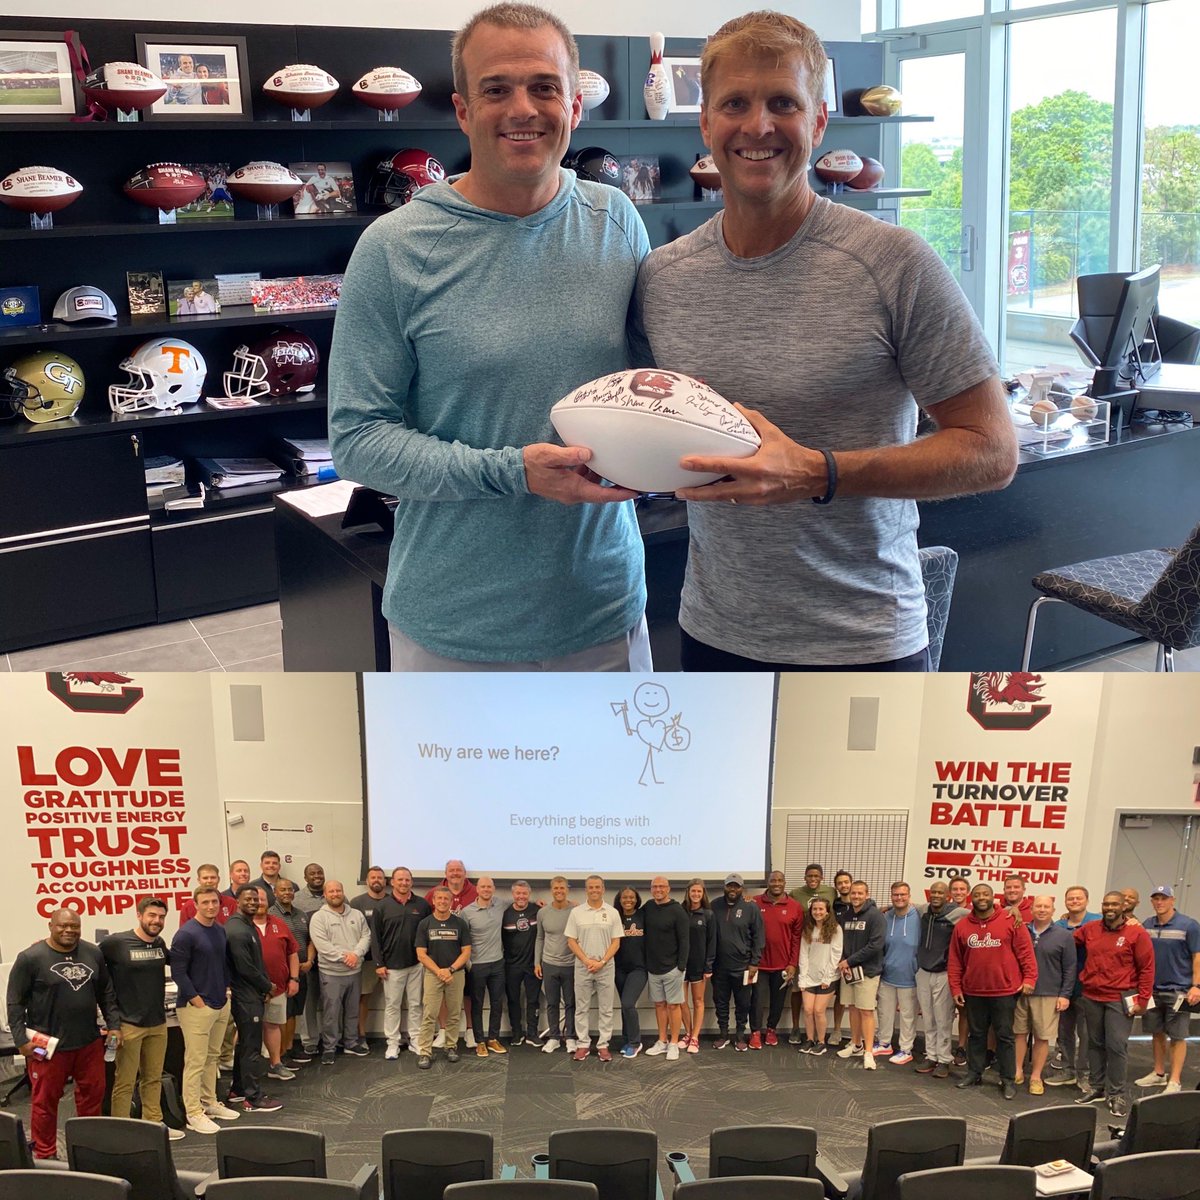 Had a blast with @CoachSBeamer & @GamecockFB staff this week! So appreciate this guy and all he stands for! Great things ahead for SC football! #AllaboutTheWhy